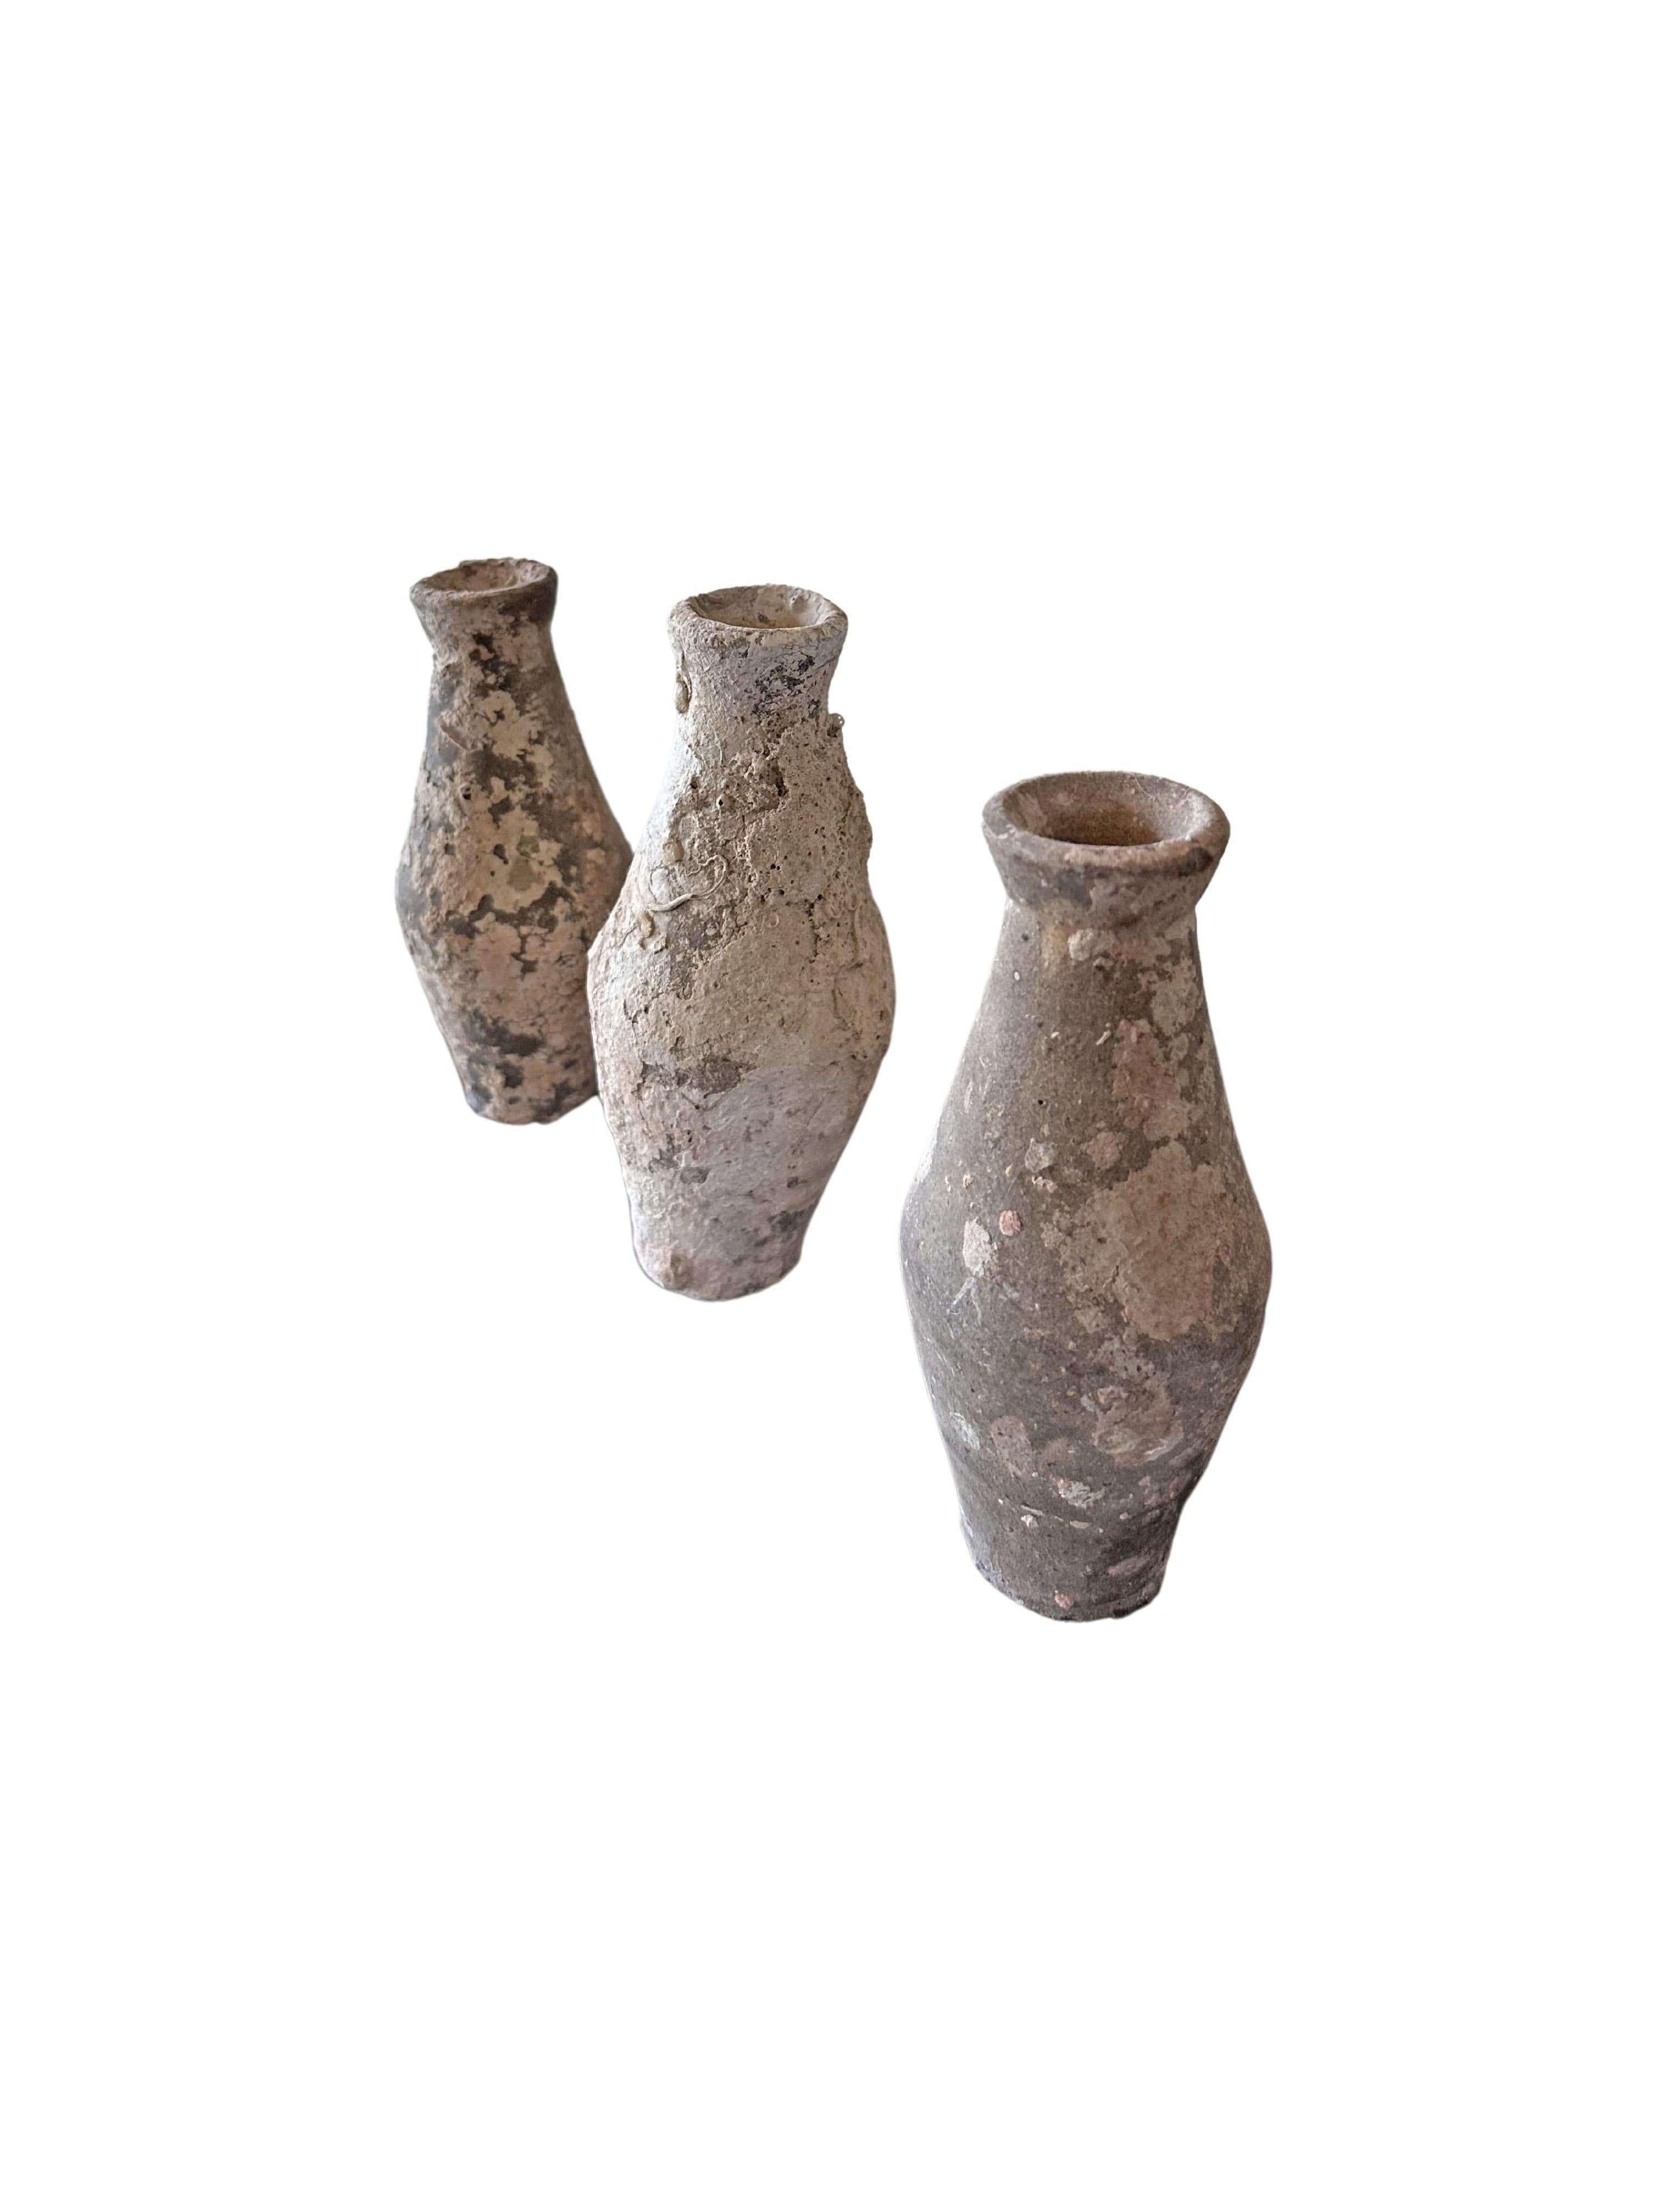 Set of Shipwreck Bottles from Indonesia c. 1600 In Good Condition For Sale In Jimbaran, Bali